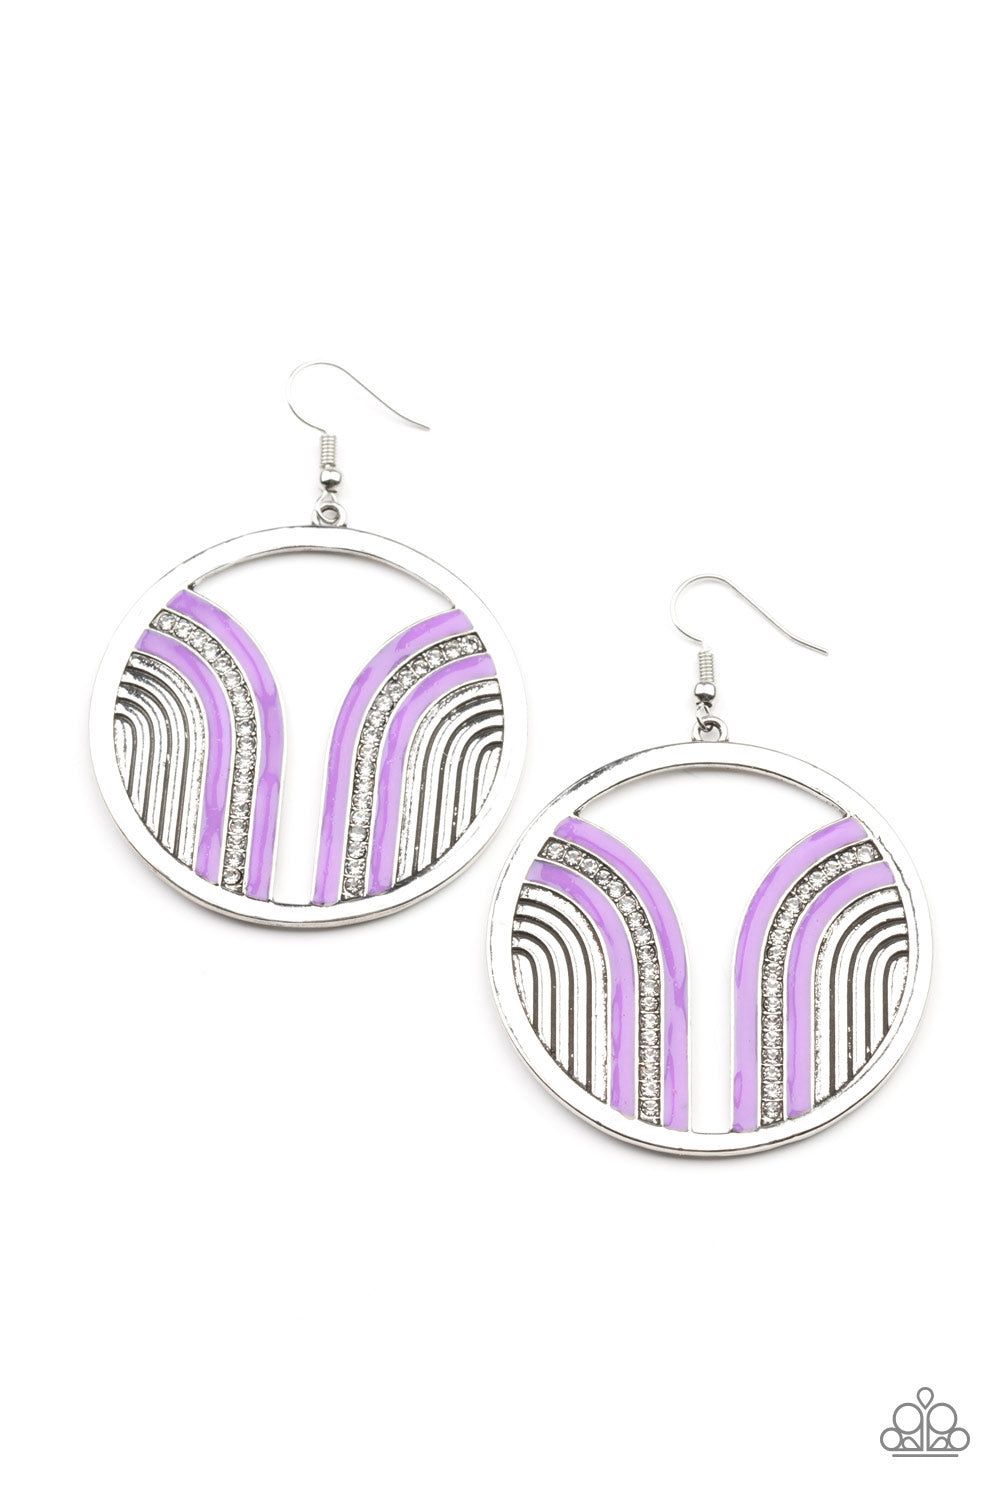 Paparazzi Accessories Delightfully Deco - Purple Earrings - Lady T Accessories